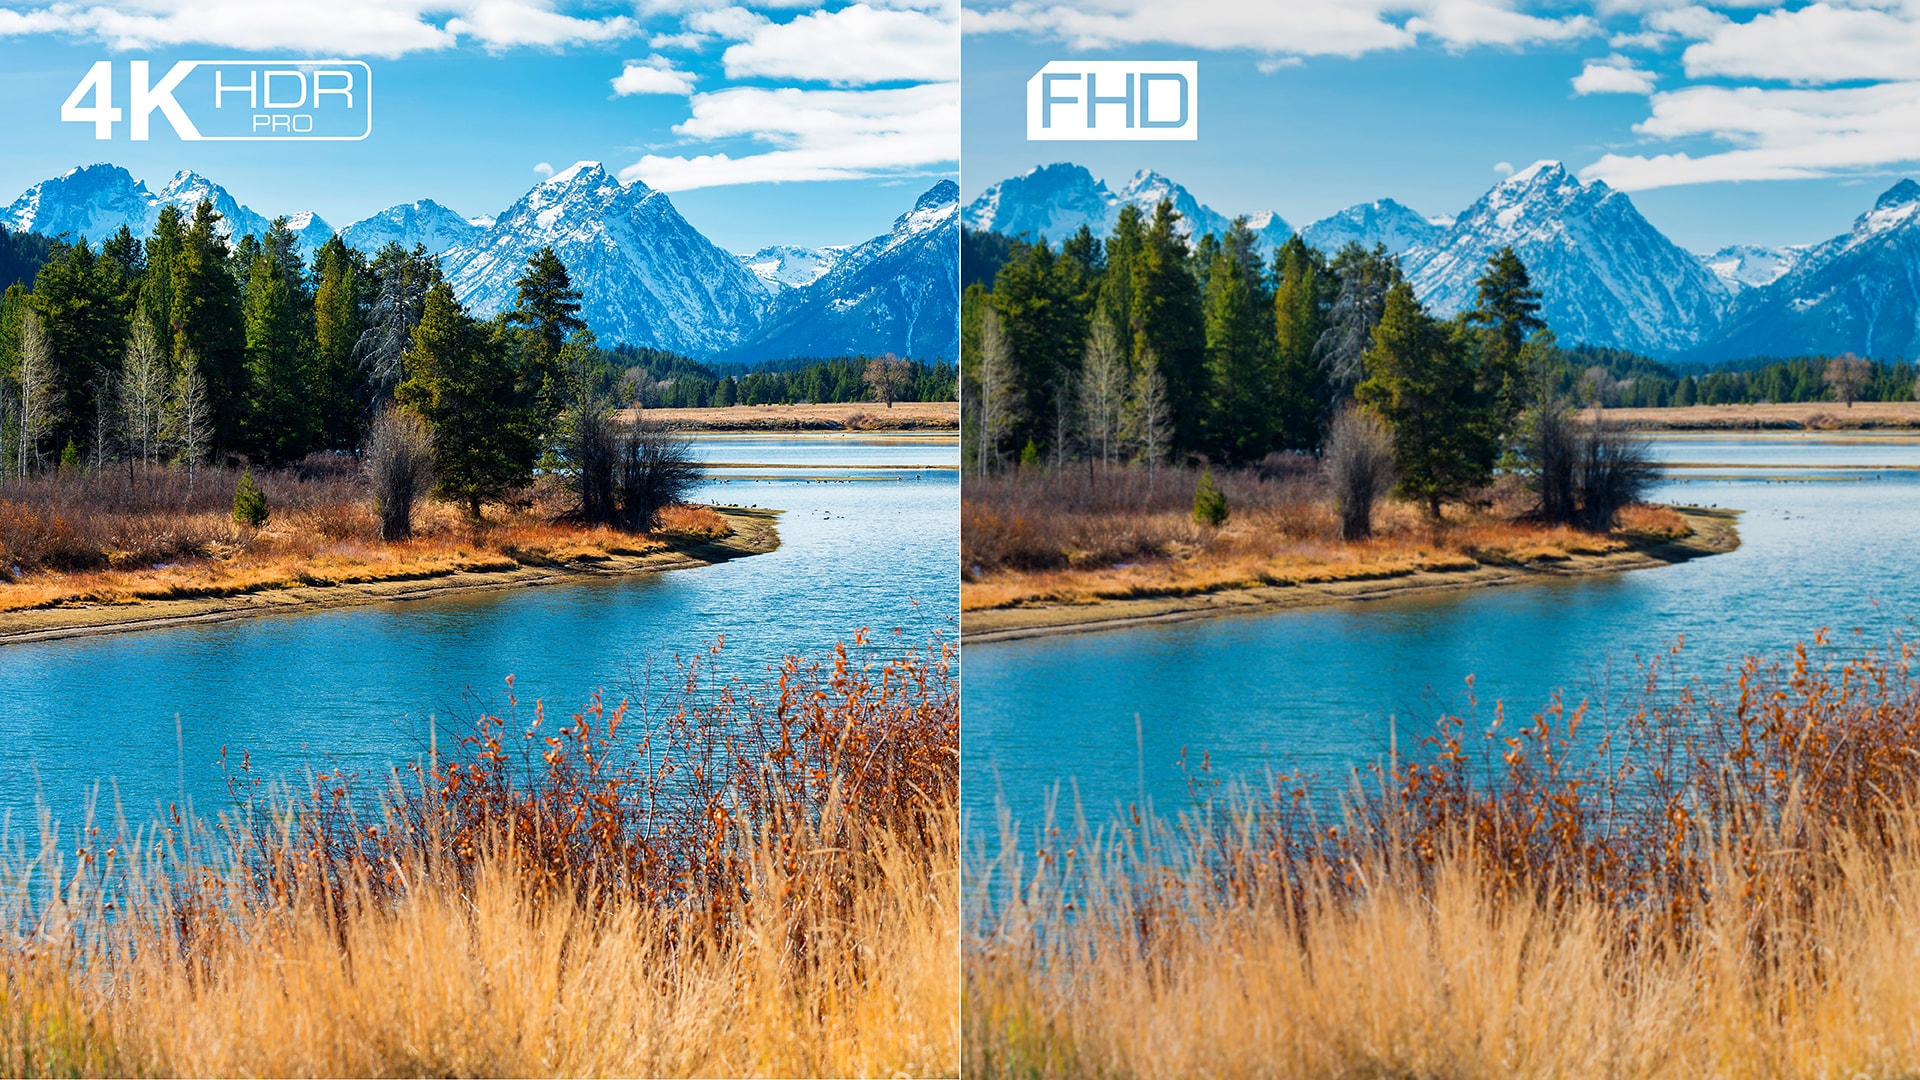 TCL-Comparing nature image with and without 4K